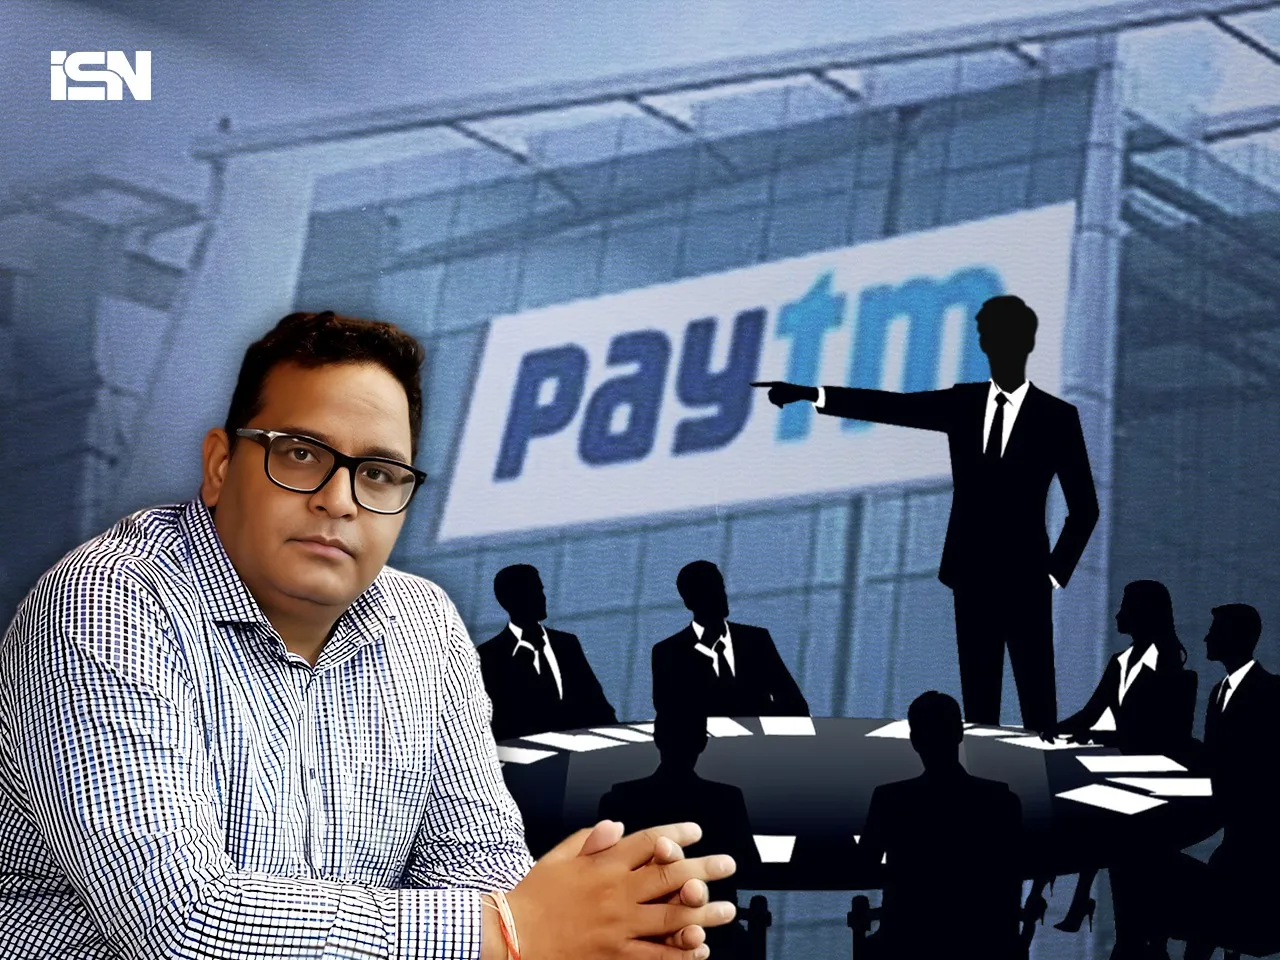 RBI action triggers six mutual funds to fully exit Paytm, while six others sharply reduce stake in Feb